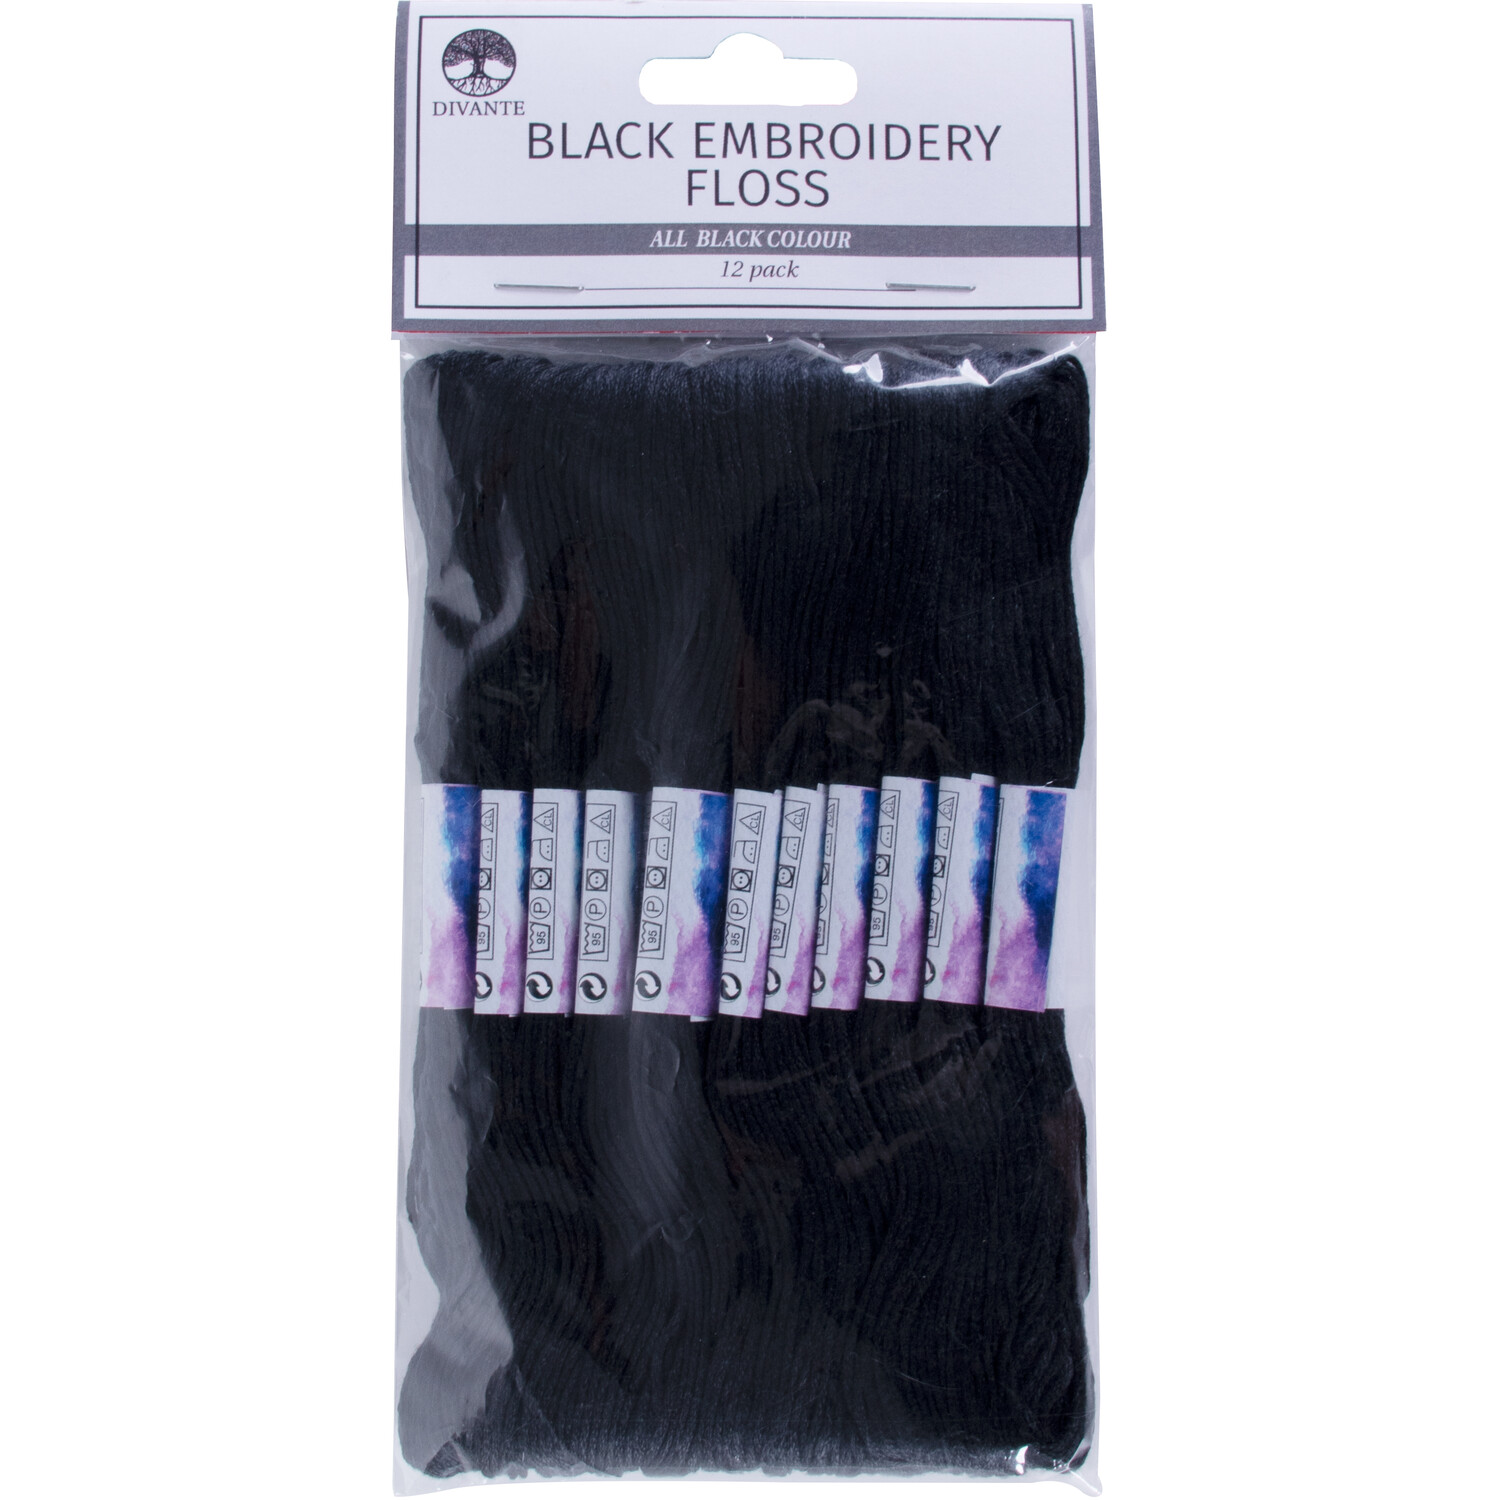 12 Pack of Embroidery Floss Bundles - Black Image